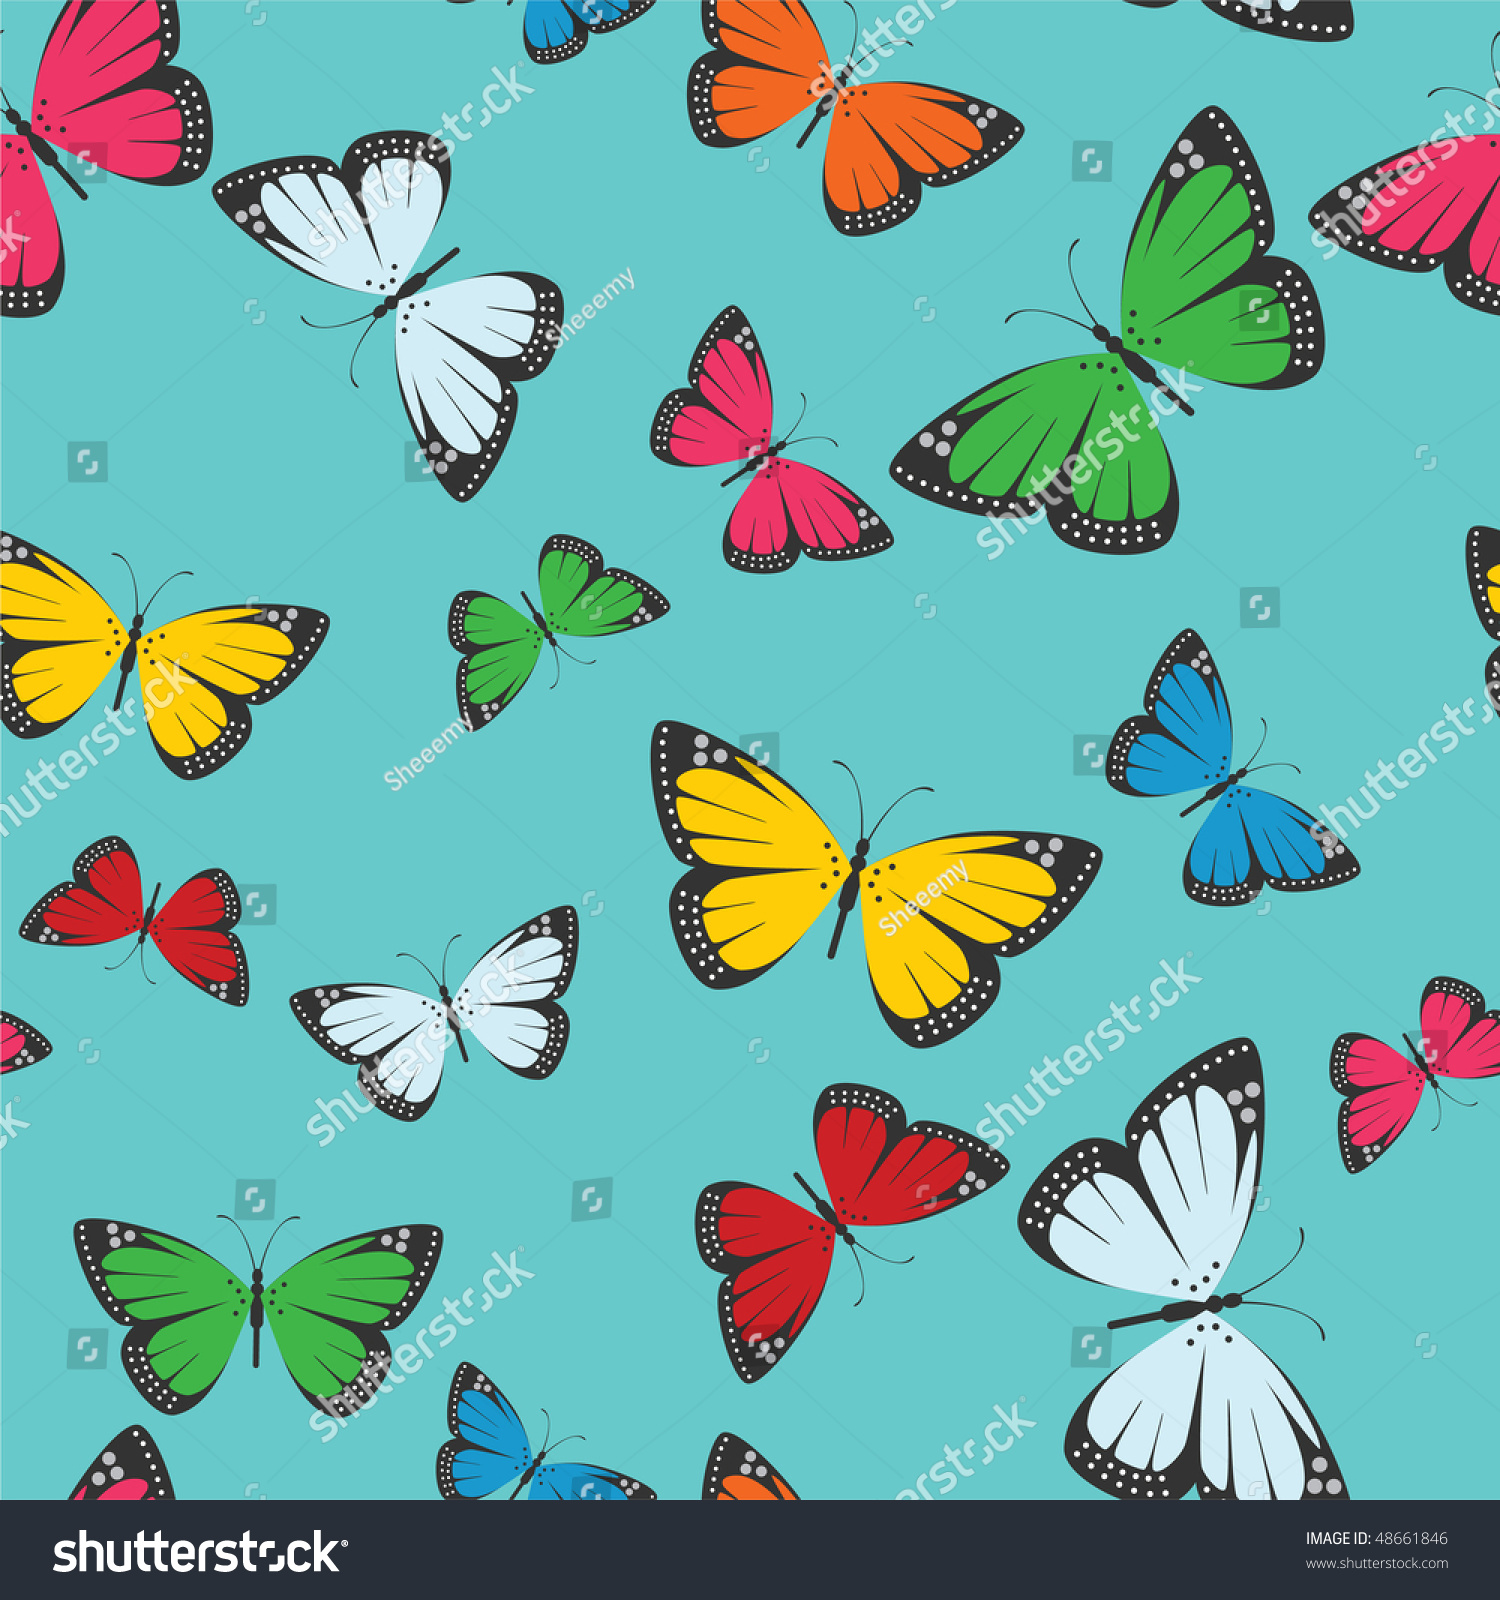 Seamless Background With Cartoon Butterflies Stock Vector Illustration ...